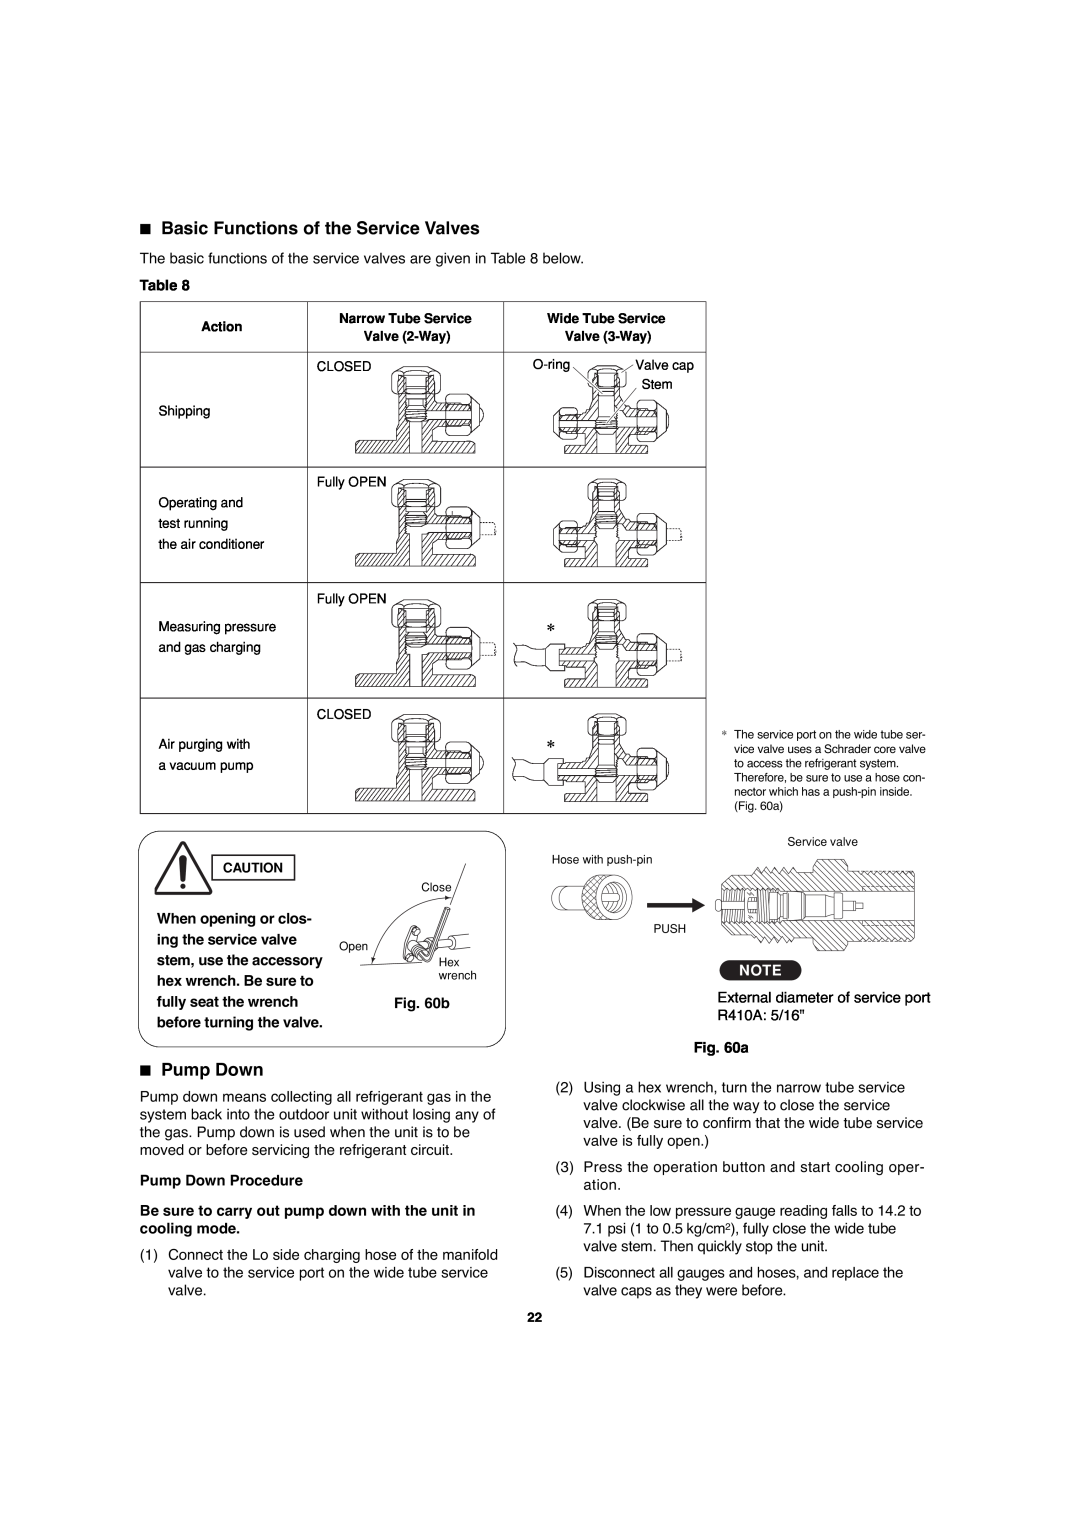 Sanyo CH0971, CH1271 service manual Basic Functions of the Service Valves, Pump Down 